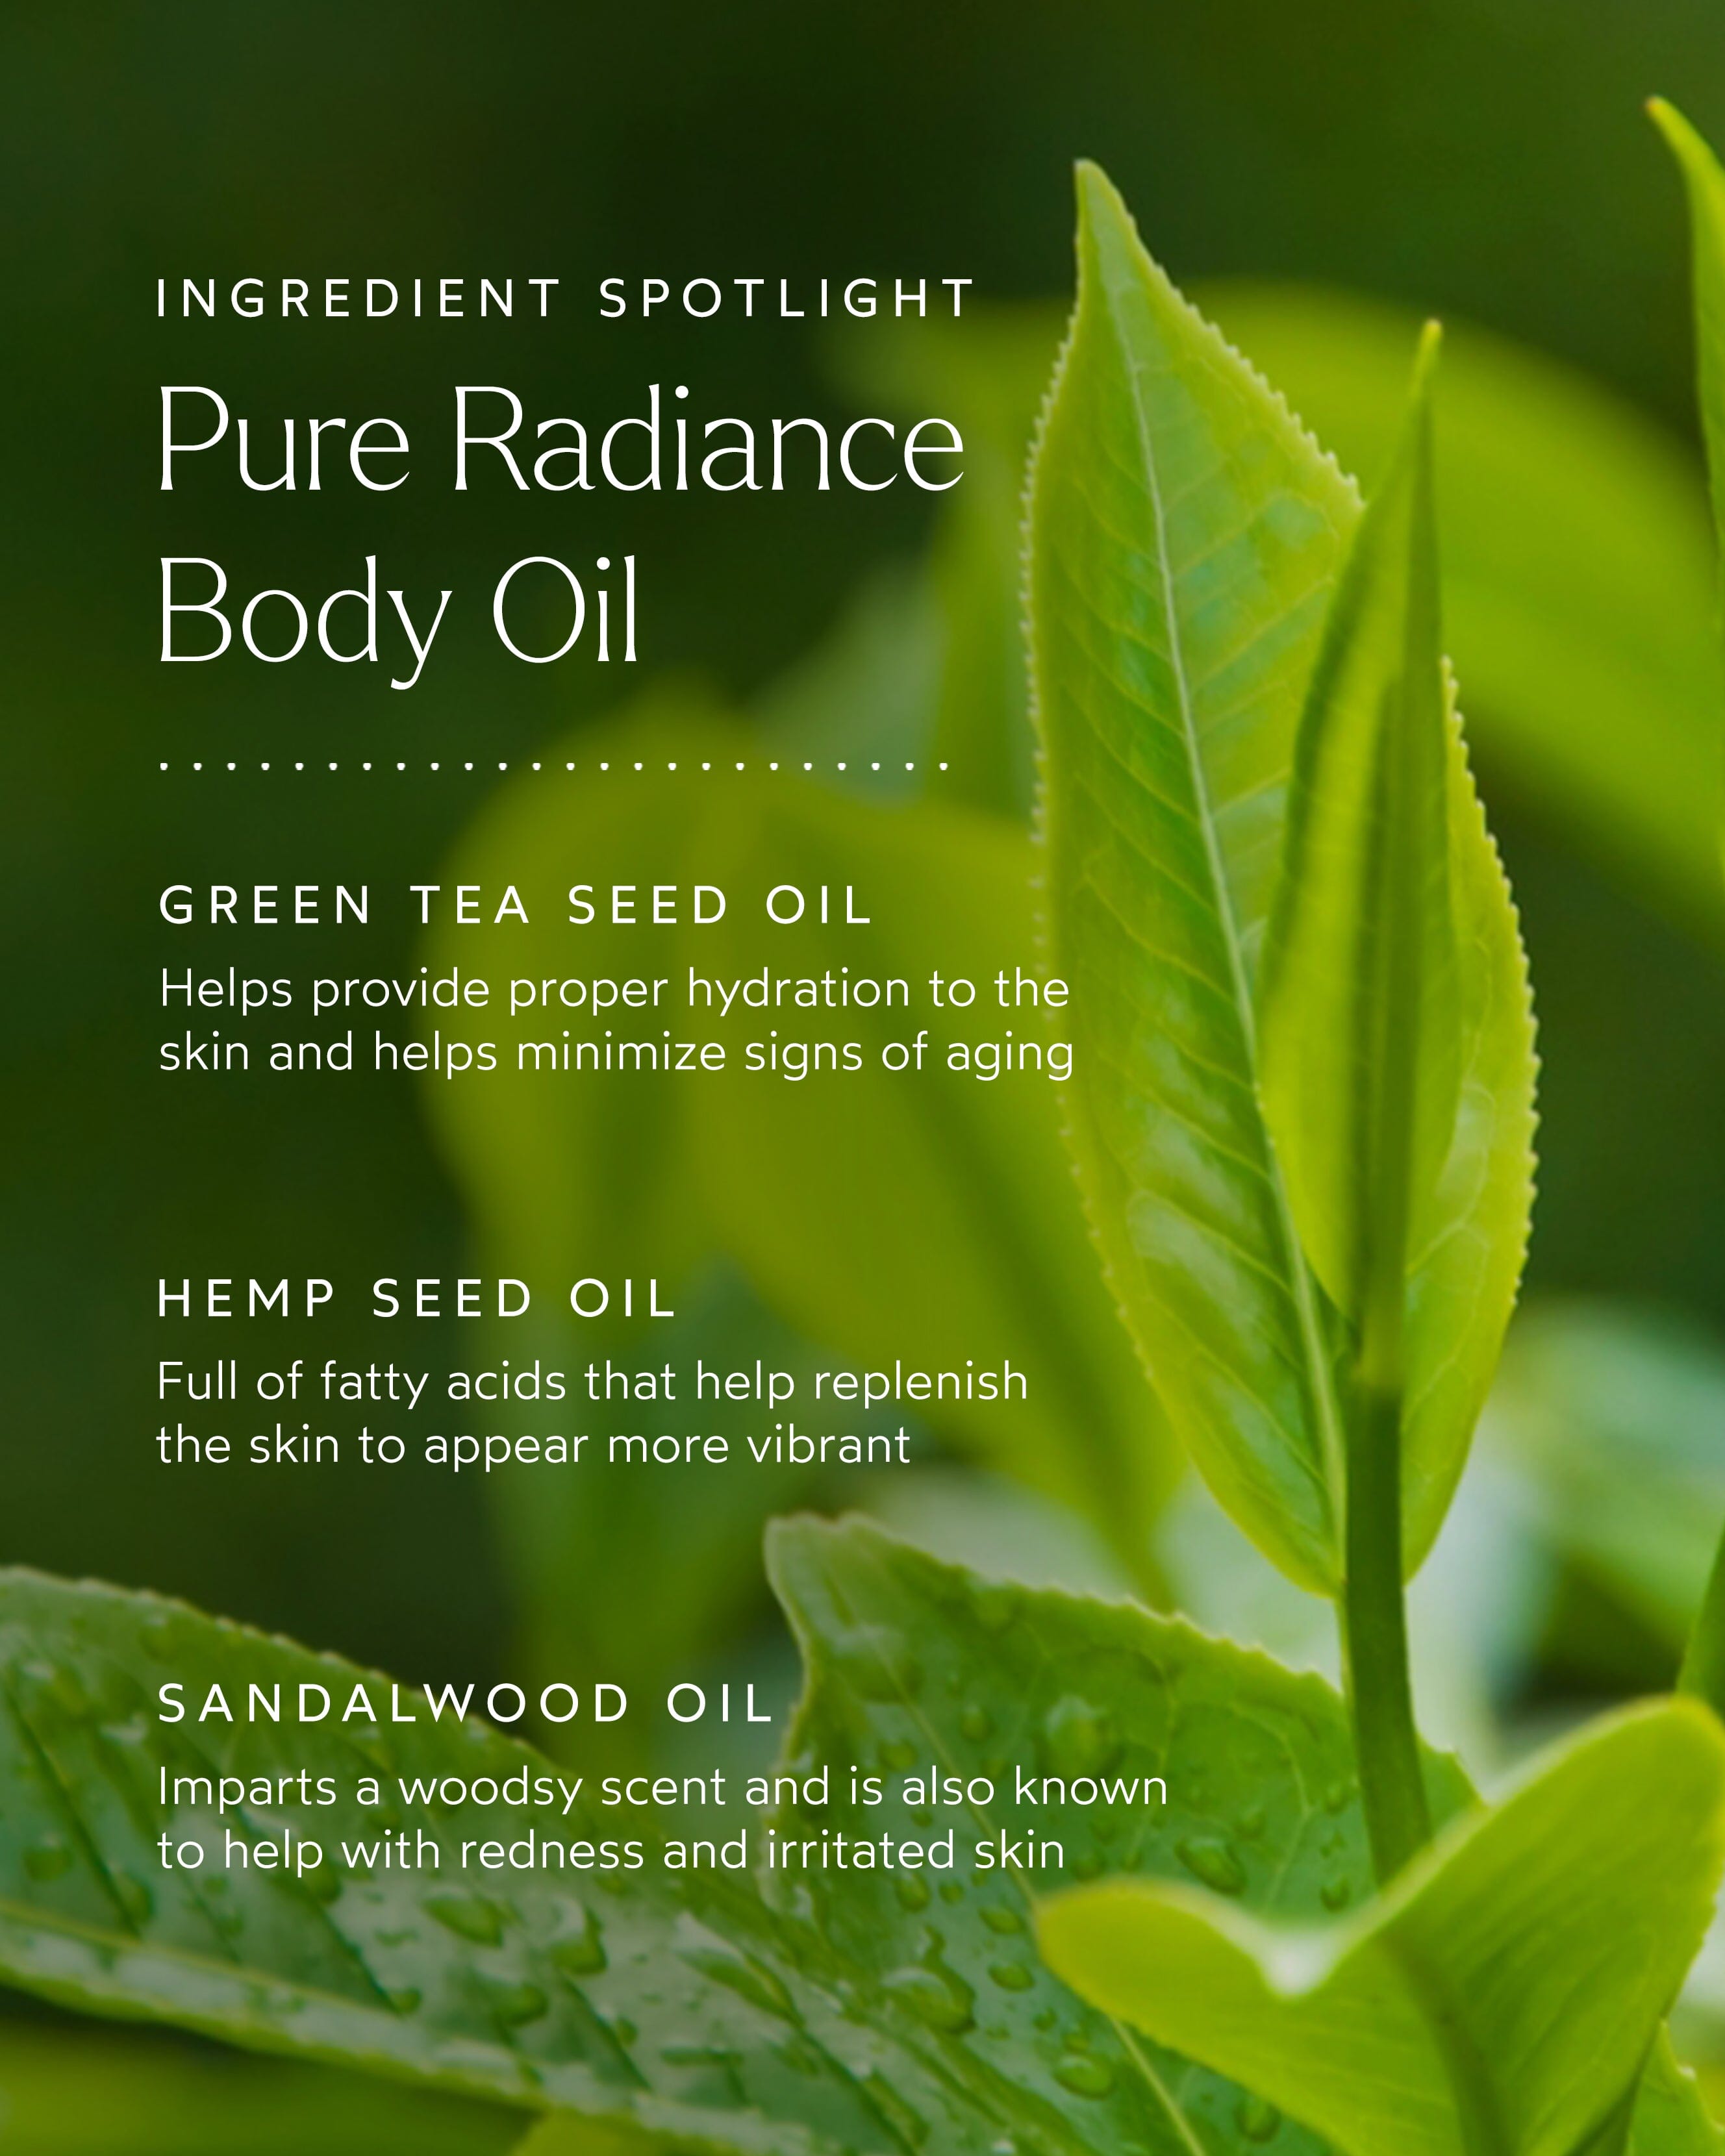 Pure Radiance Body Oil